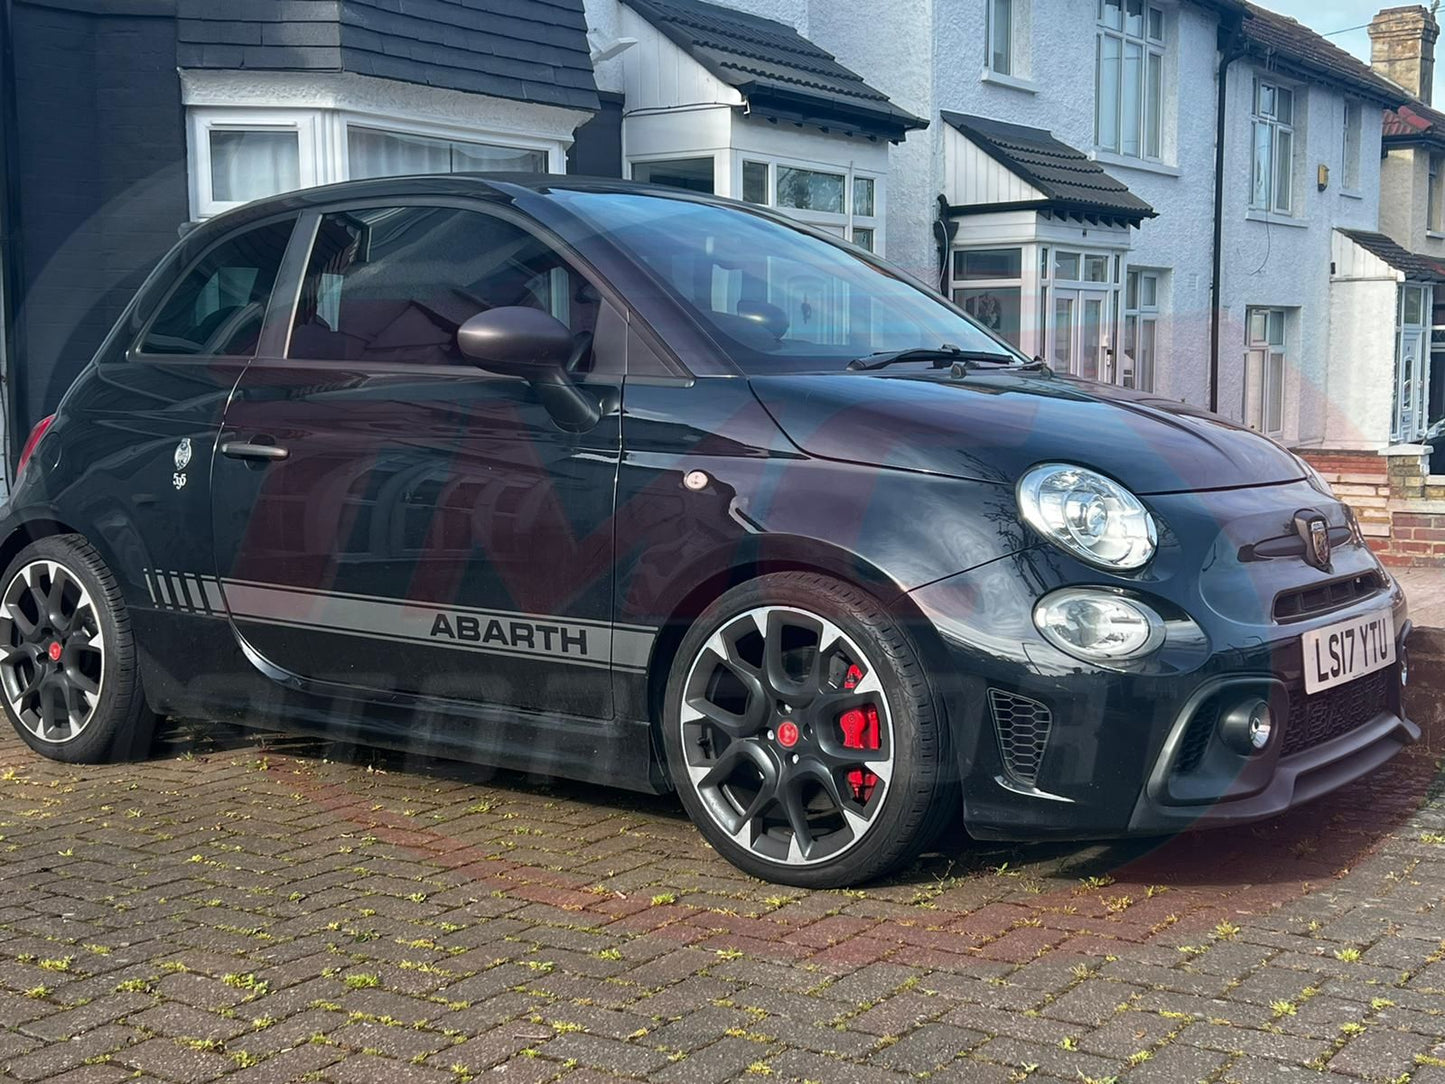 TMC by V-MAXX Lowering Springs for all Abarth 500/595/695 Models